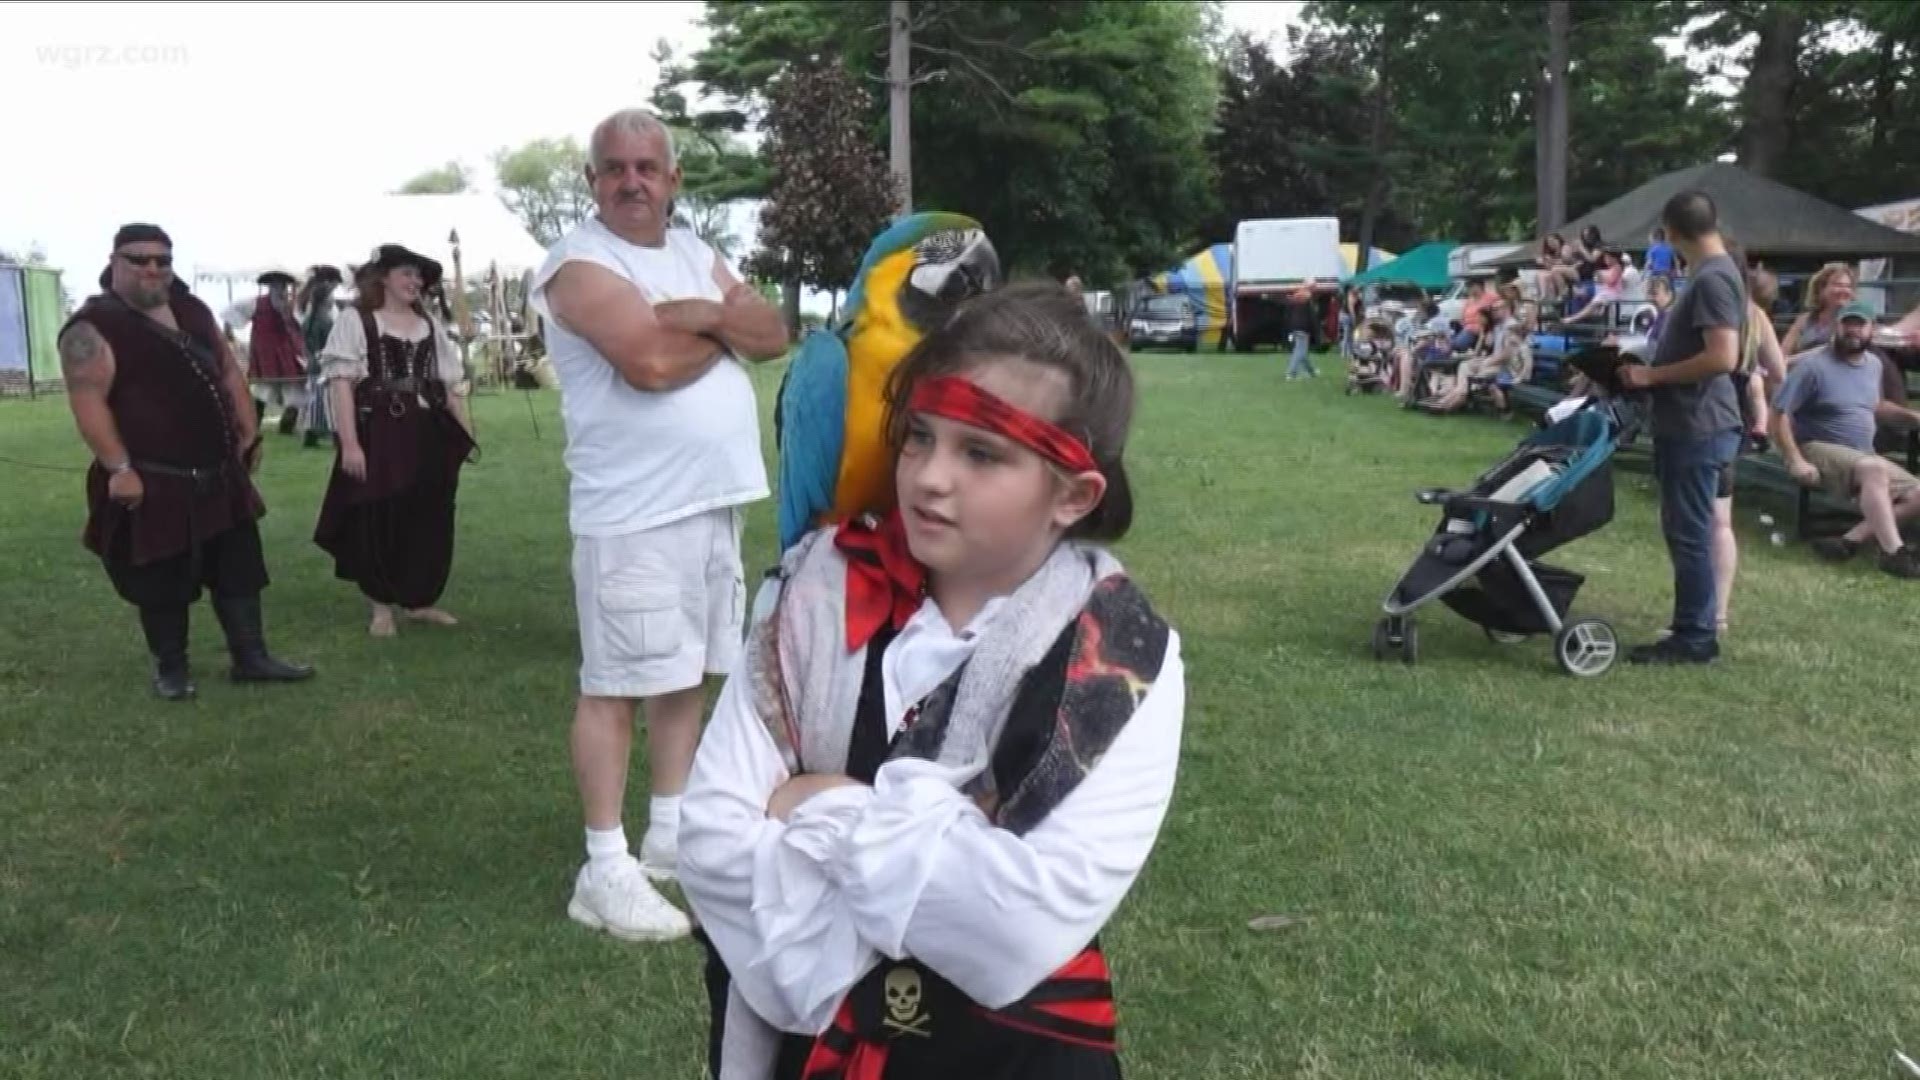 Olcott is having its annual Pirate Festival. The festival includes bounce houses for the kids, live pirate shows, music and more.